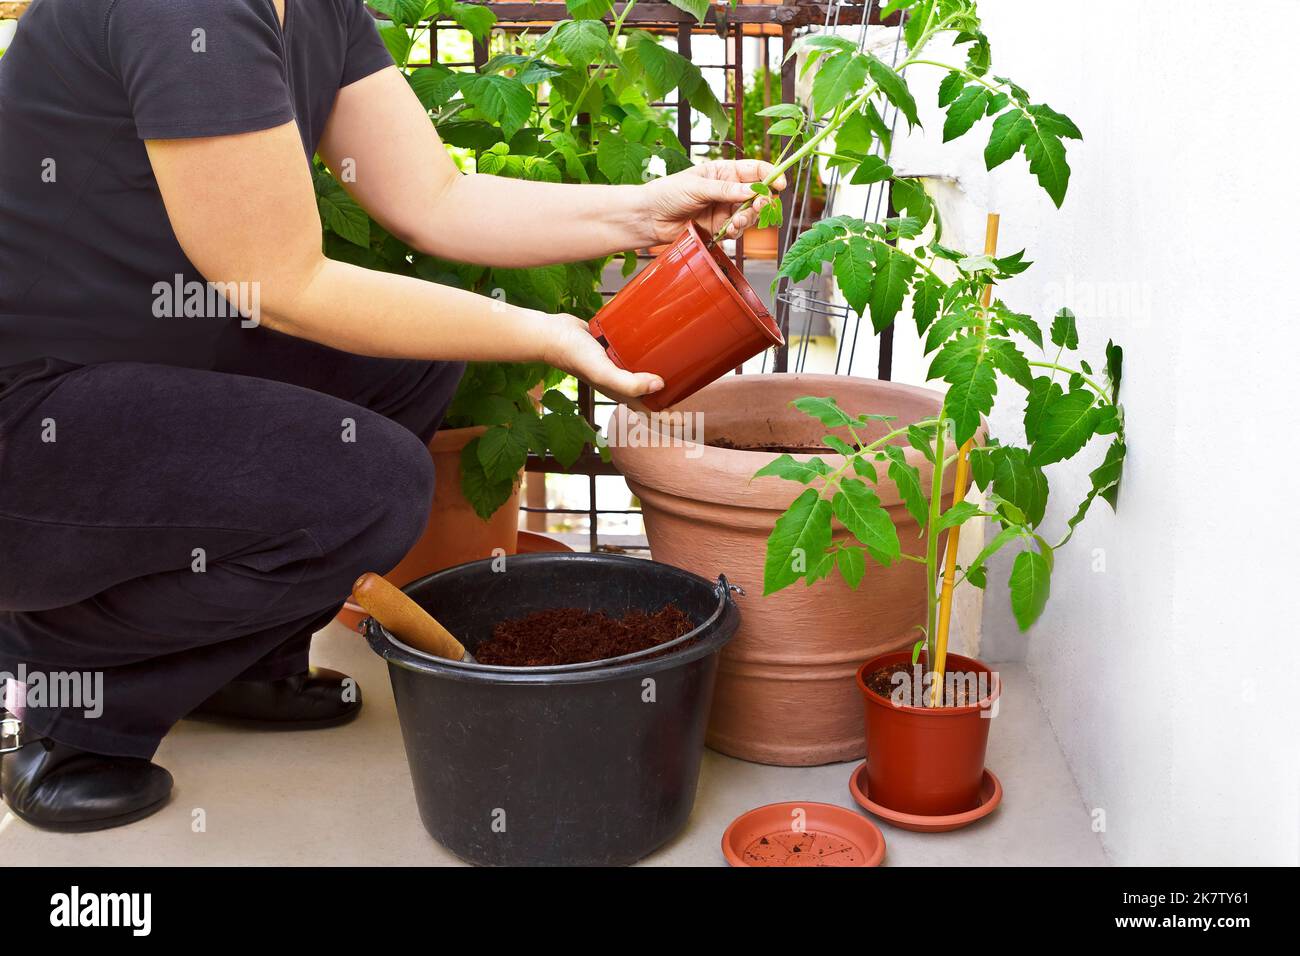 Step by step instruction for growing tomato plants from seeds: 9. when night temperatures are above freezing point, repot into big summer container. Stock Photo